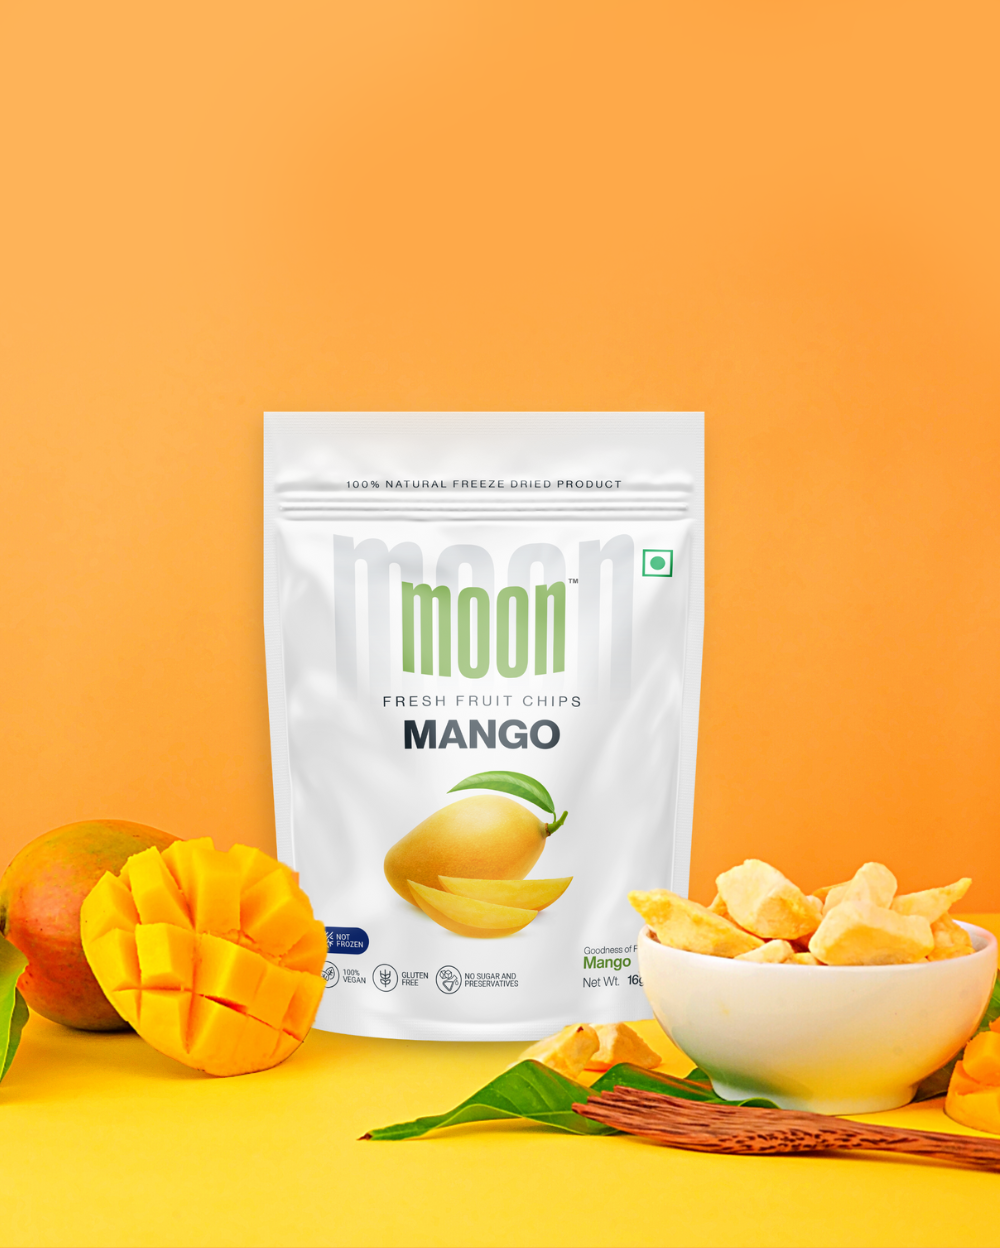 Package of Moon Freeze Dried Banana + Mango freeze-dried fruit chips with nutrient-rich snacking fresh mango slices and chips on an orange background by MOONFREEZE FOODS PRIVATE LIMITED.